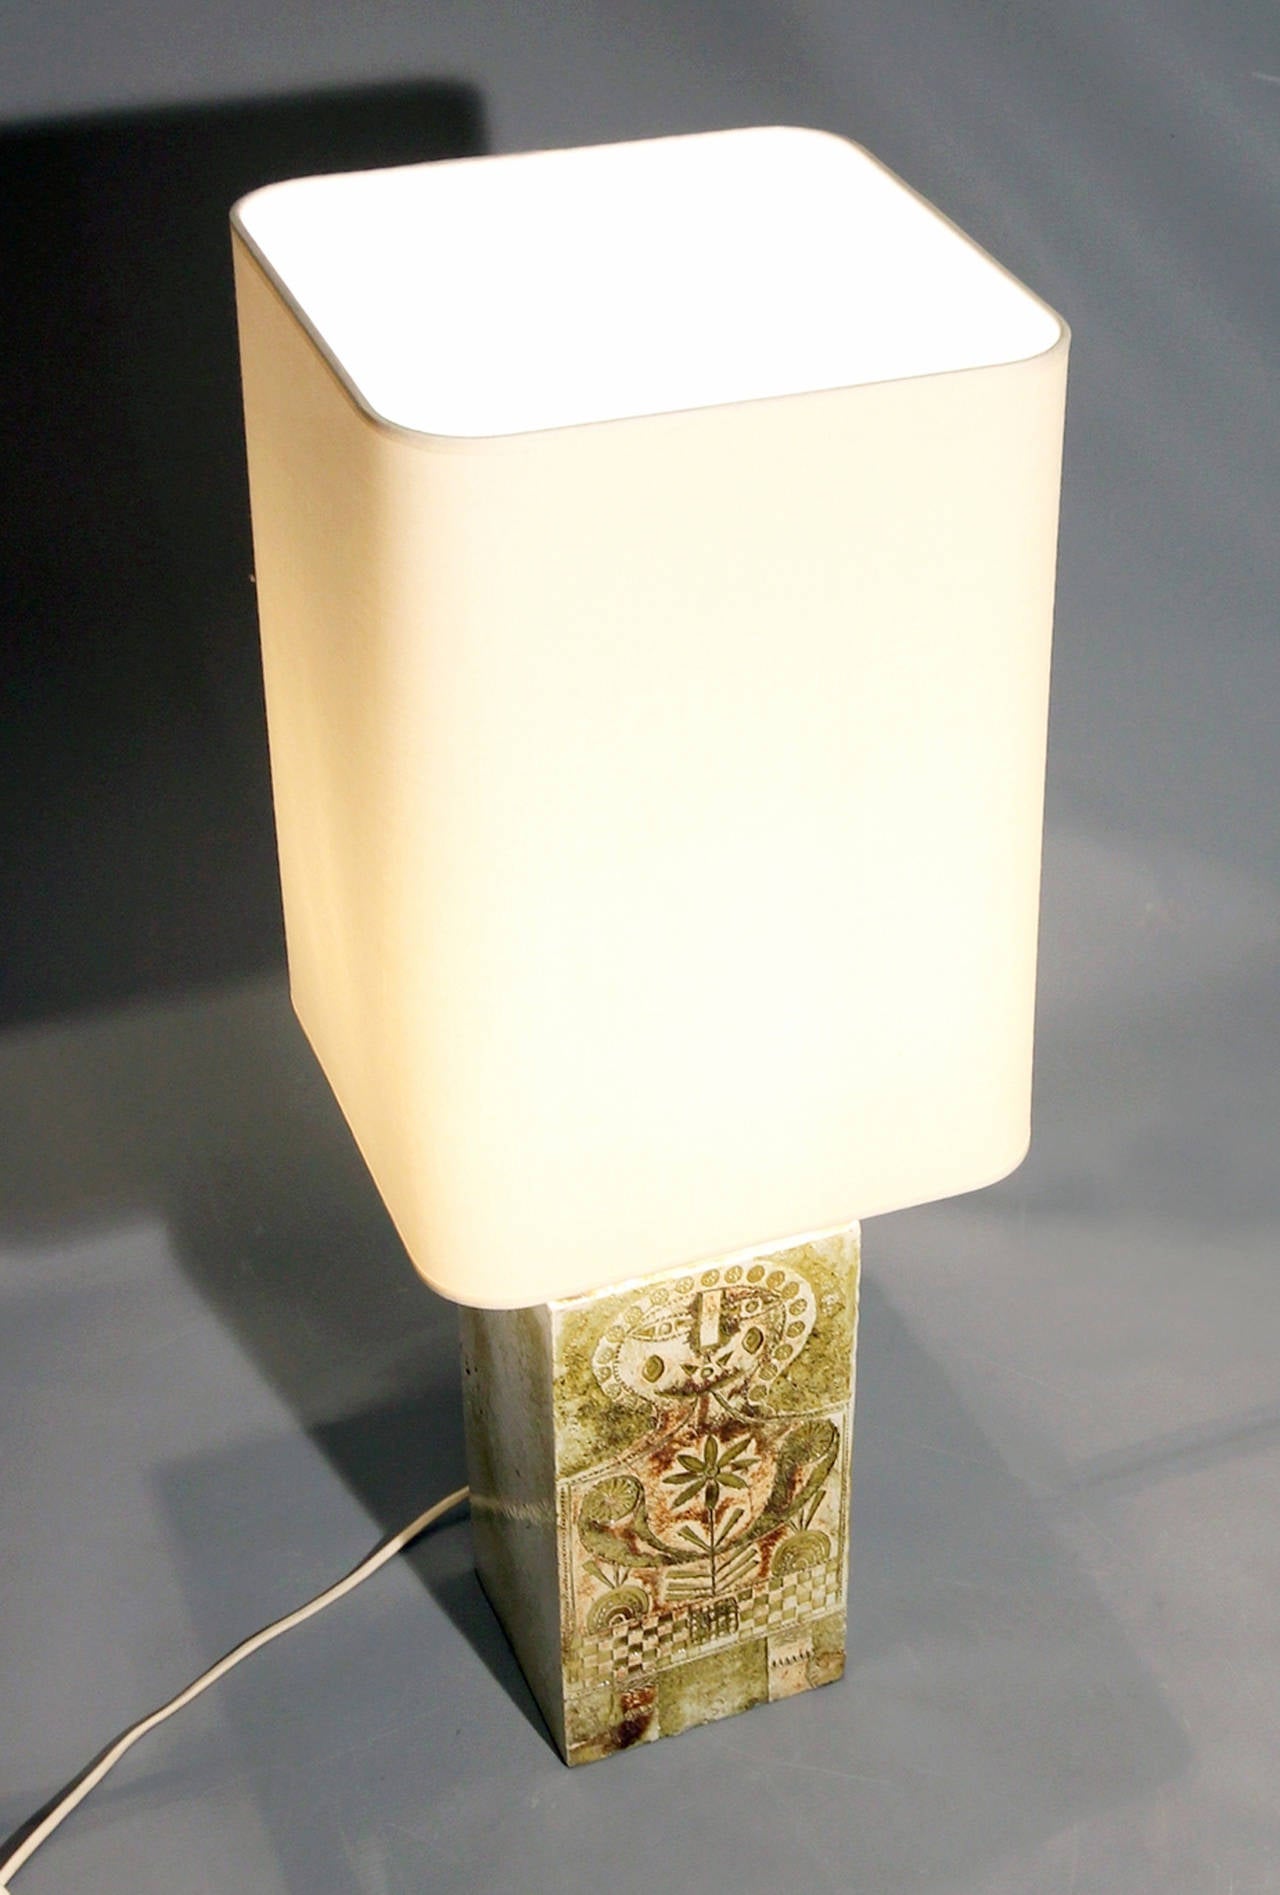 Square earthenware lamp with incised figural decoration and enameled rough ceramic texture. Signed on back 